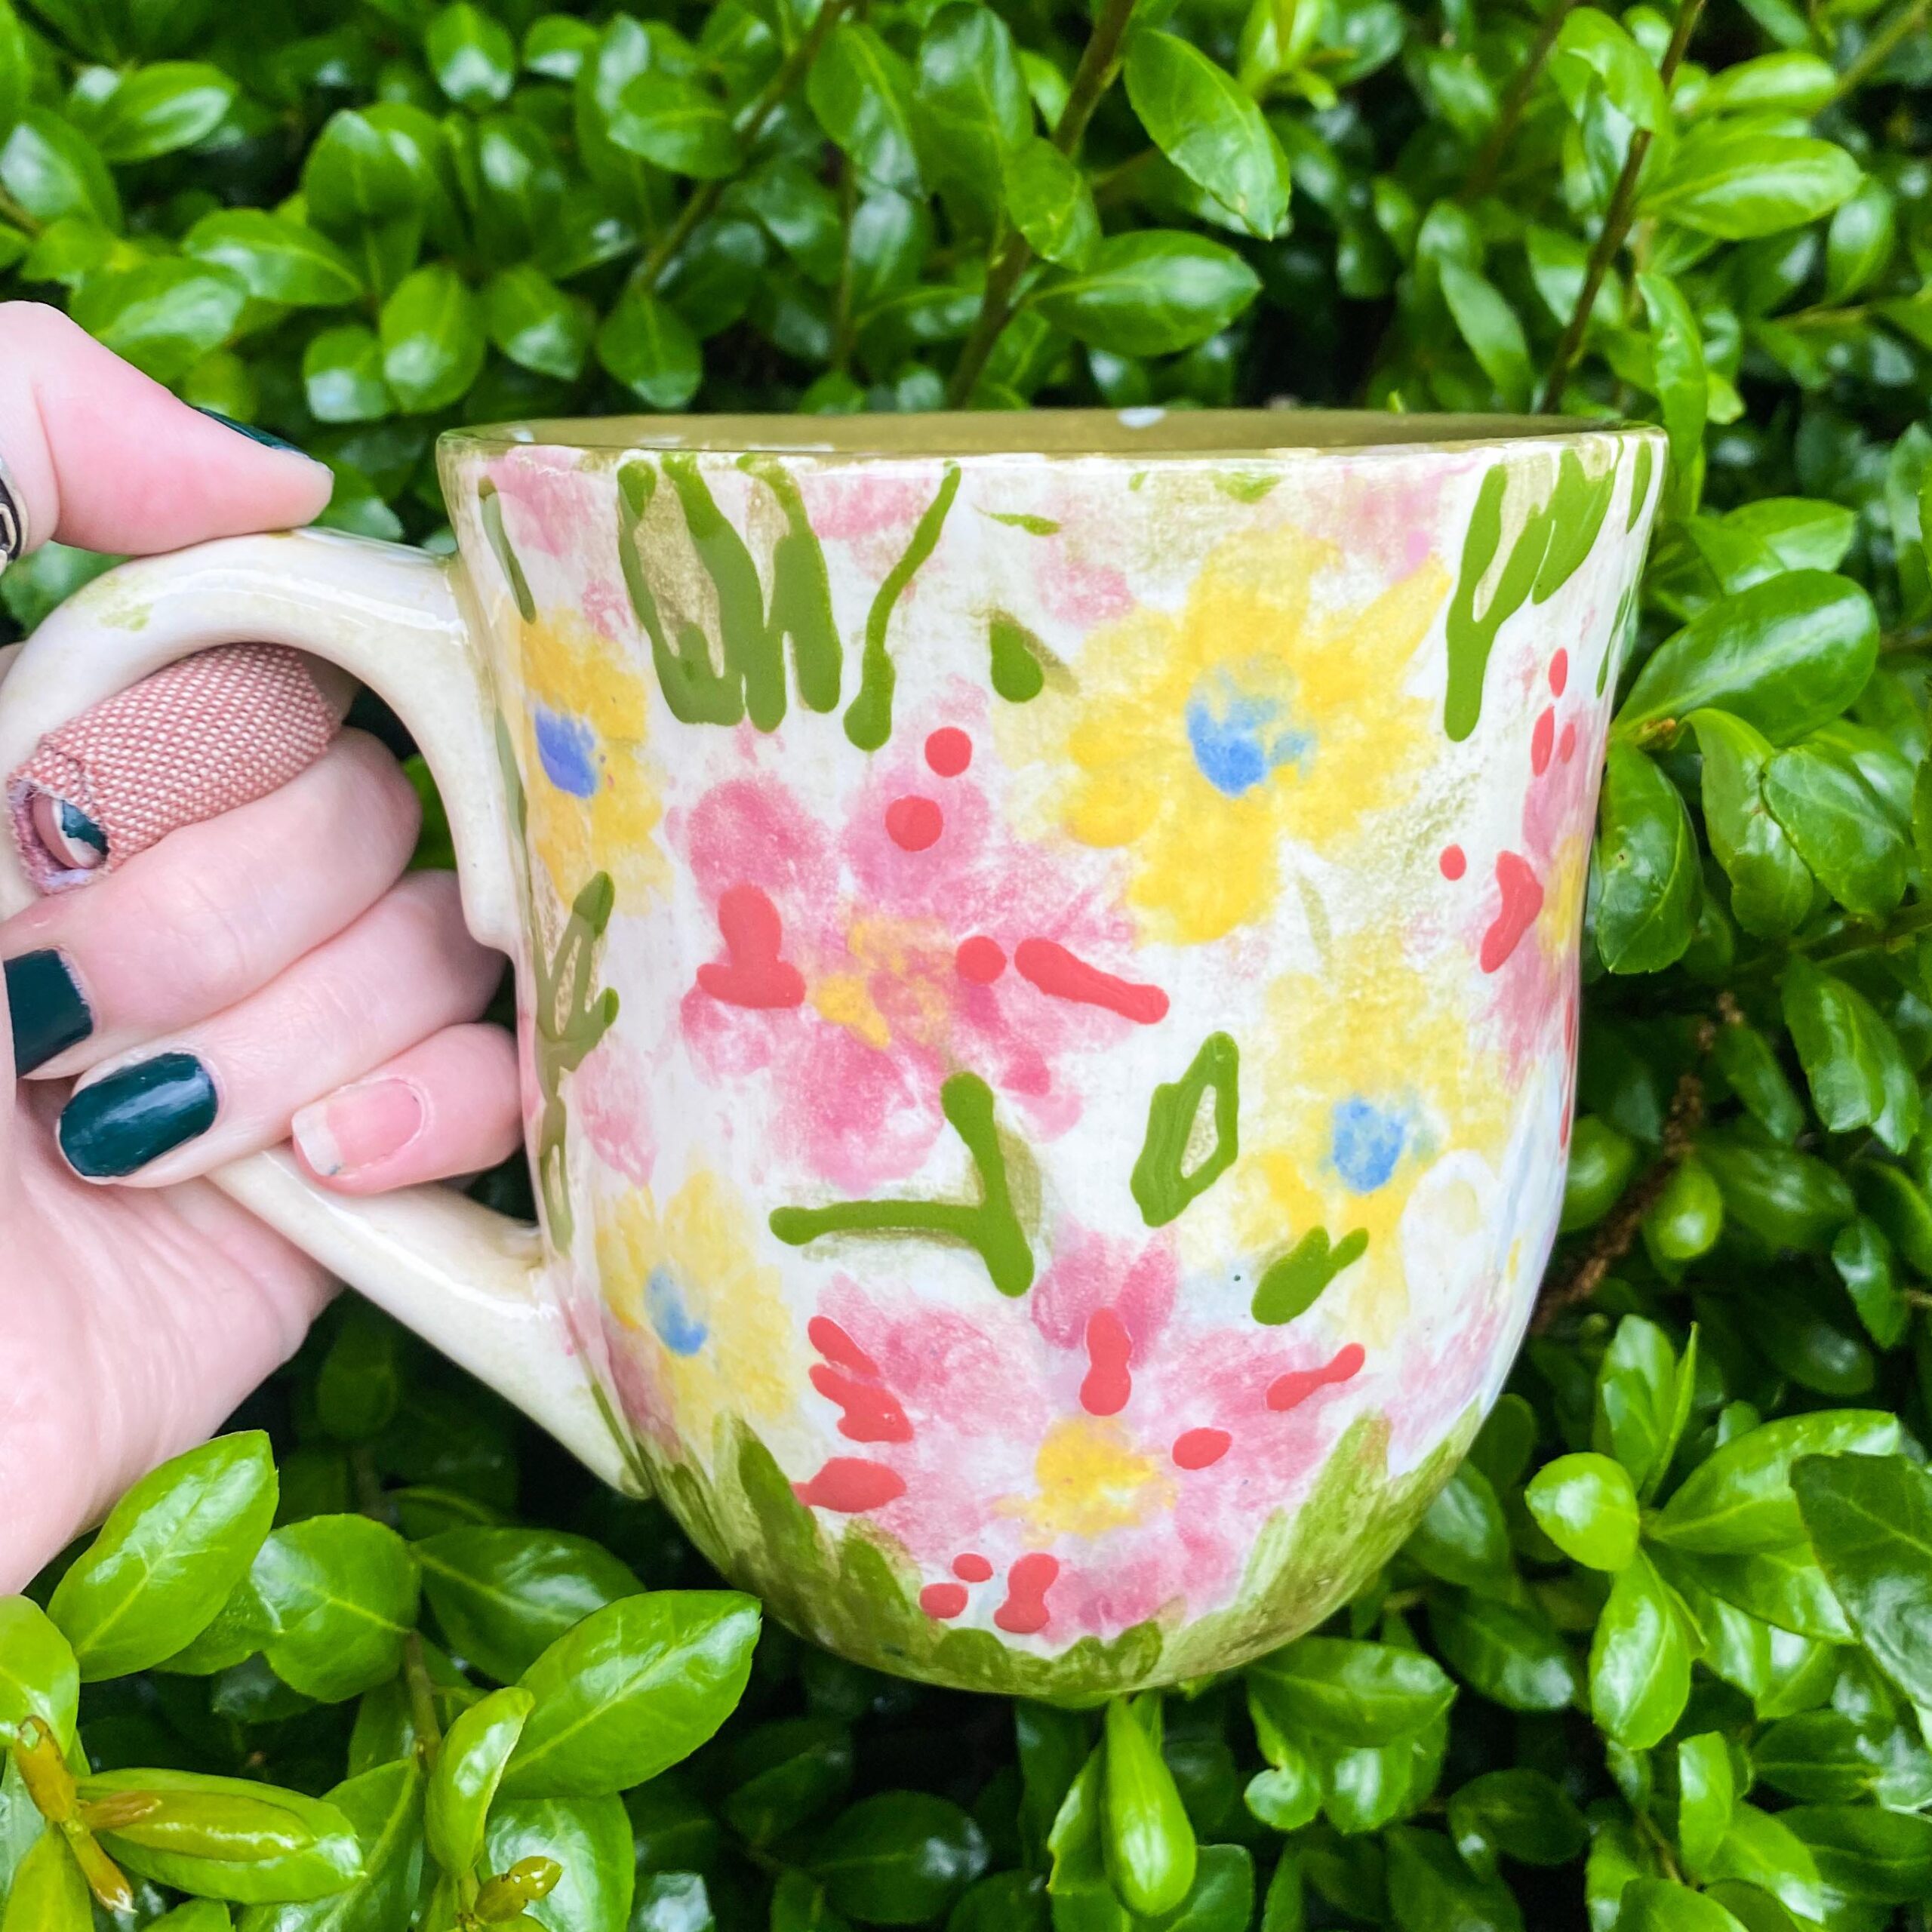 A hand holding a coffee mug in the grass.